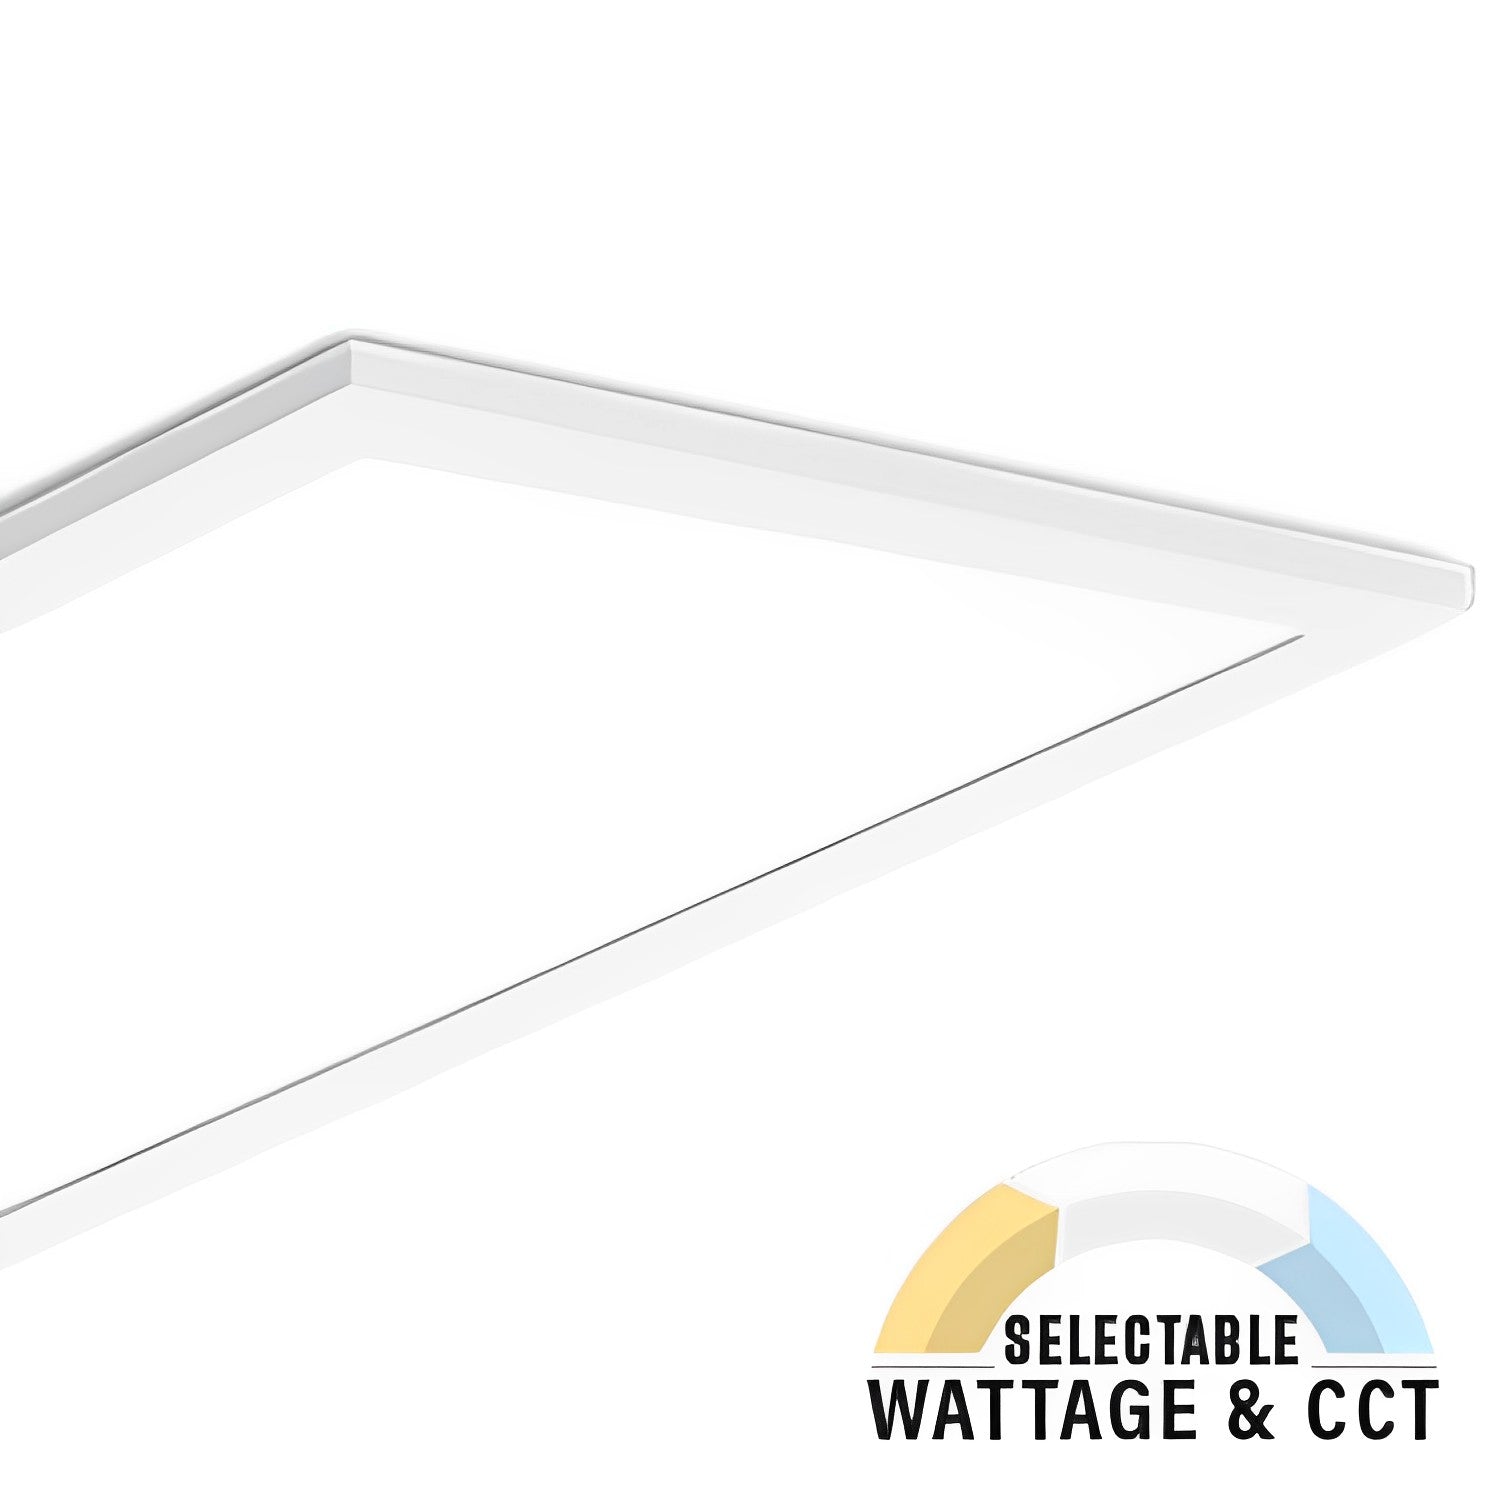 LED Flat Panel Lights and Fixtures